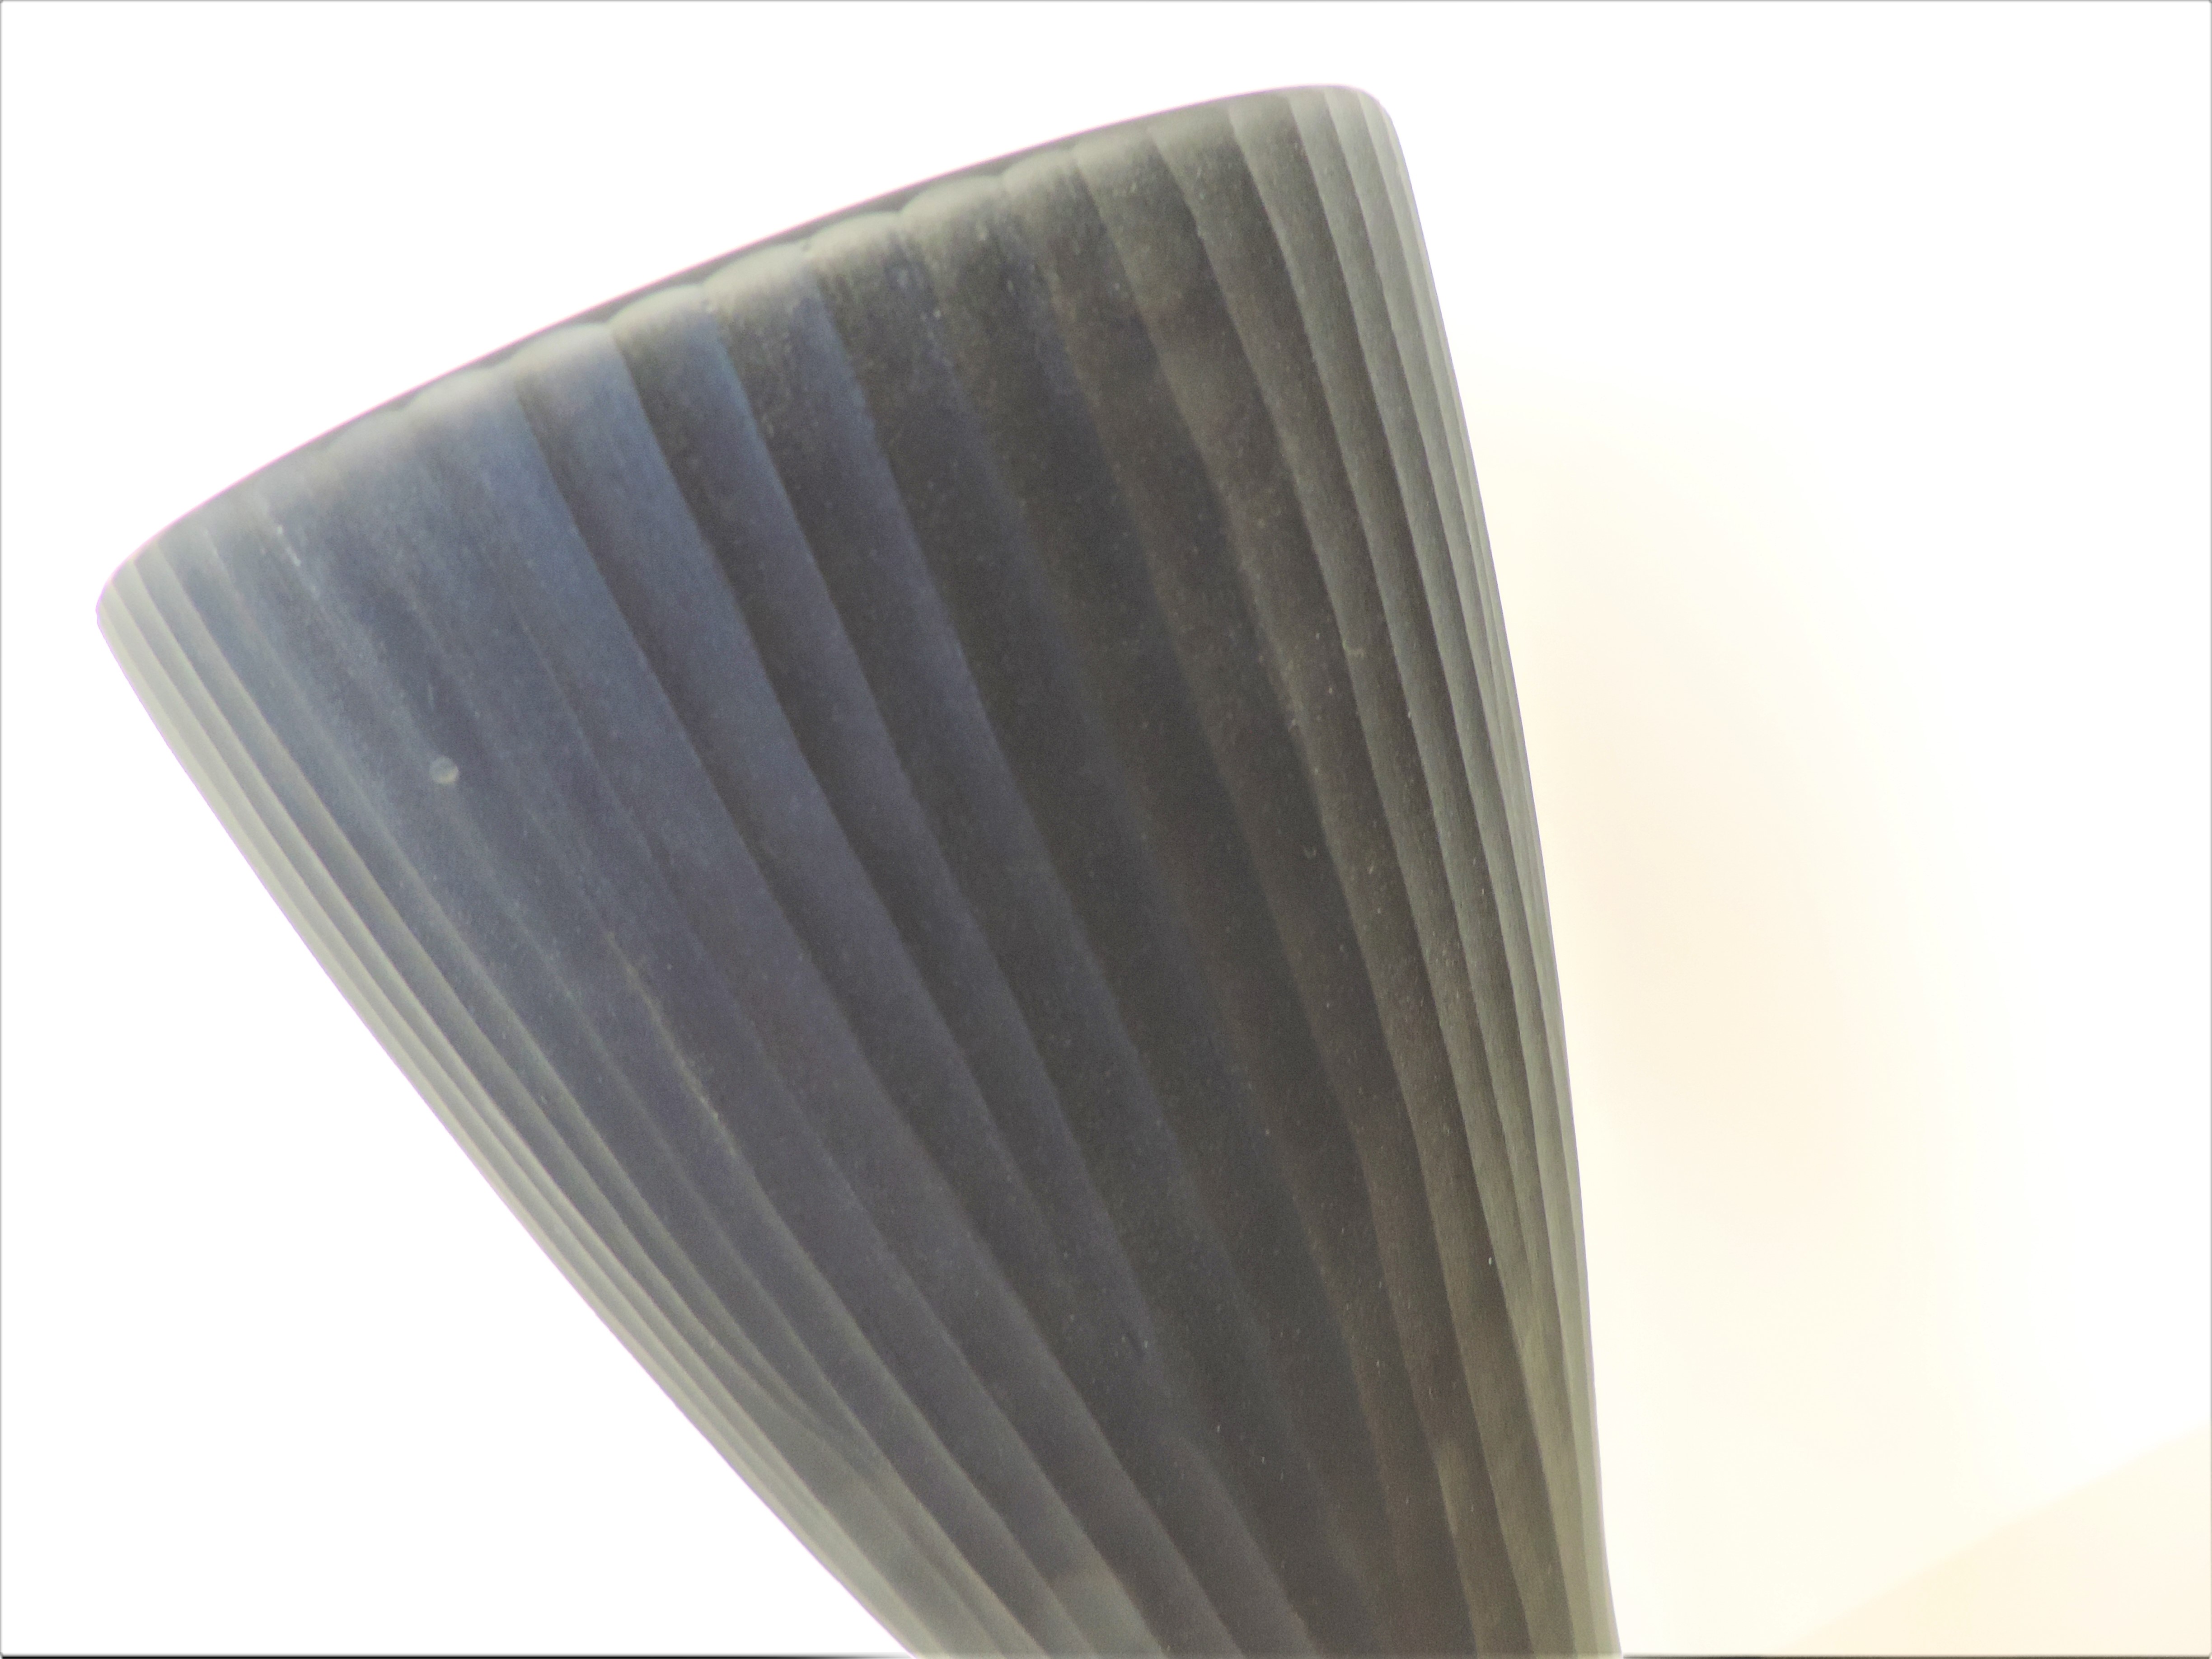 Textured Art Glass Black to Clear Vase 32cm High. - Image 4 of 6